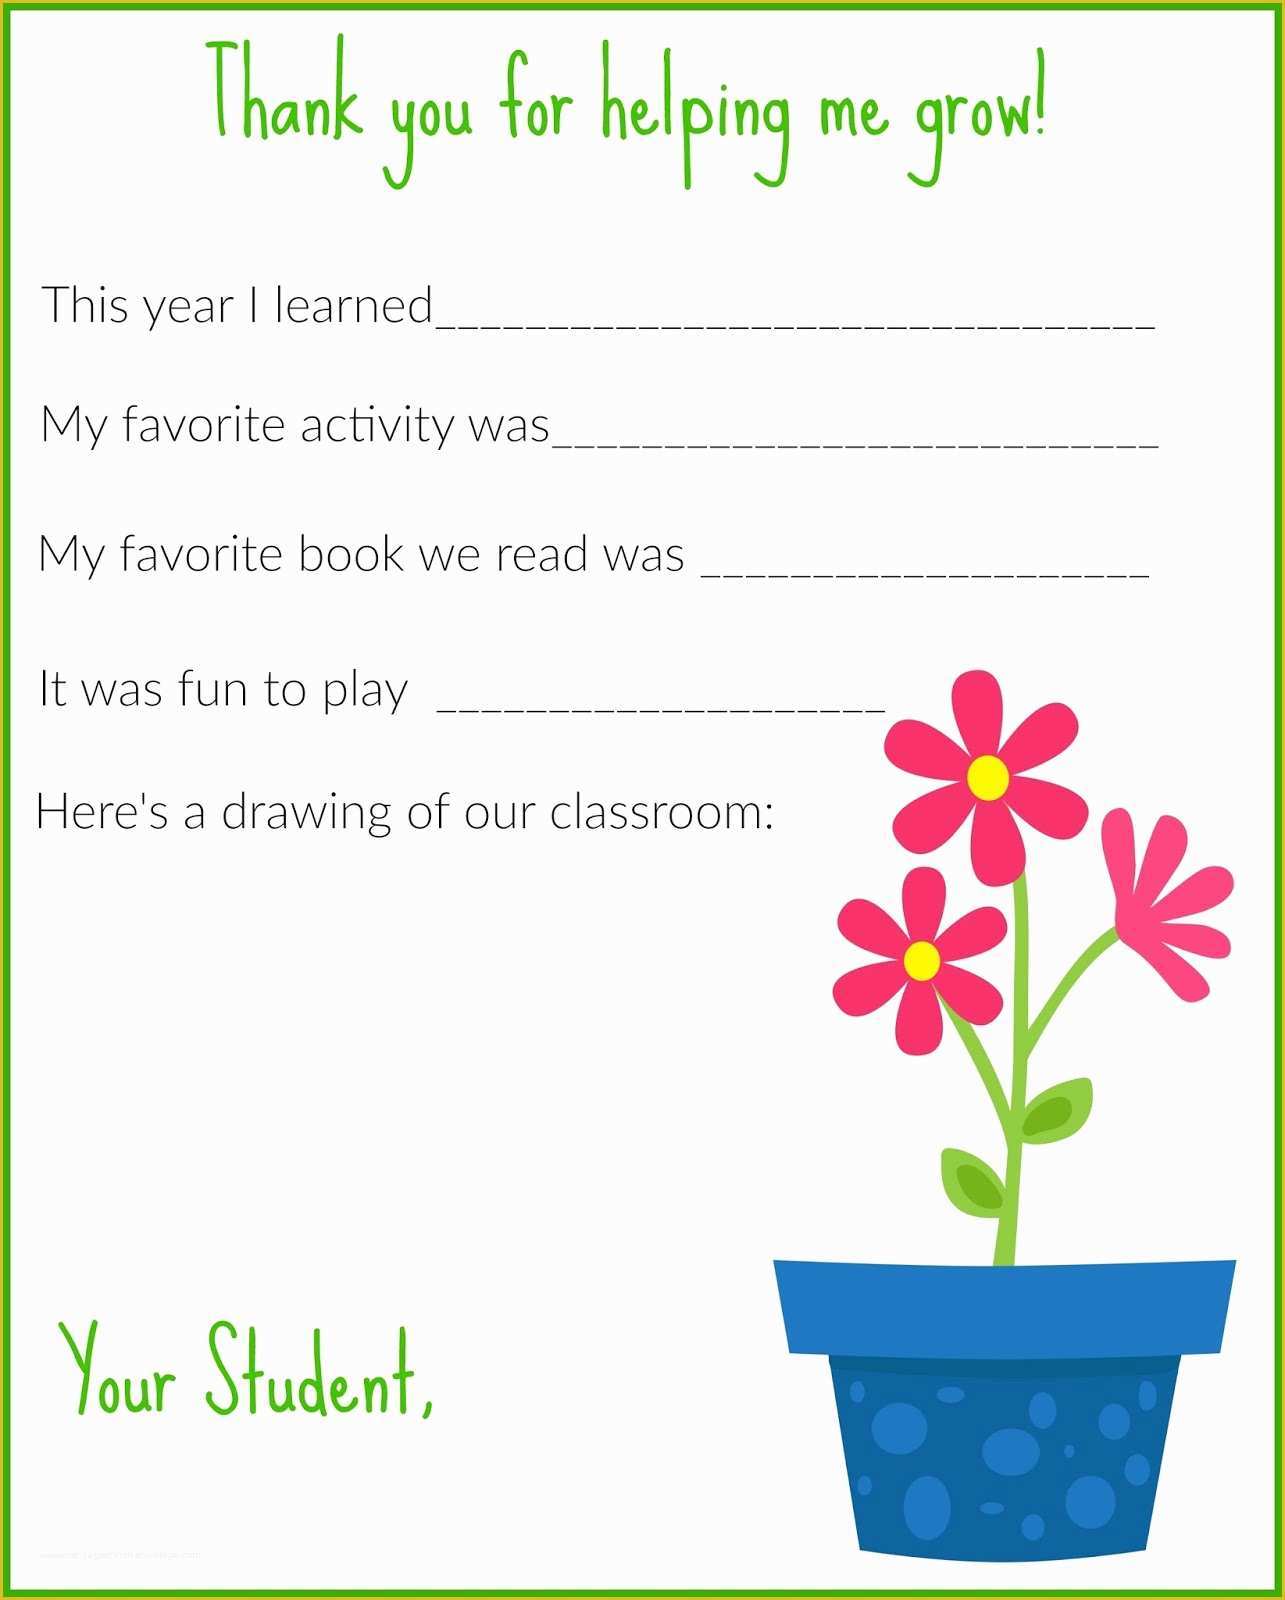 Thank You Note Template Free Of A Thank You Letter for Teachers Free Printable the